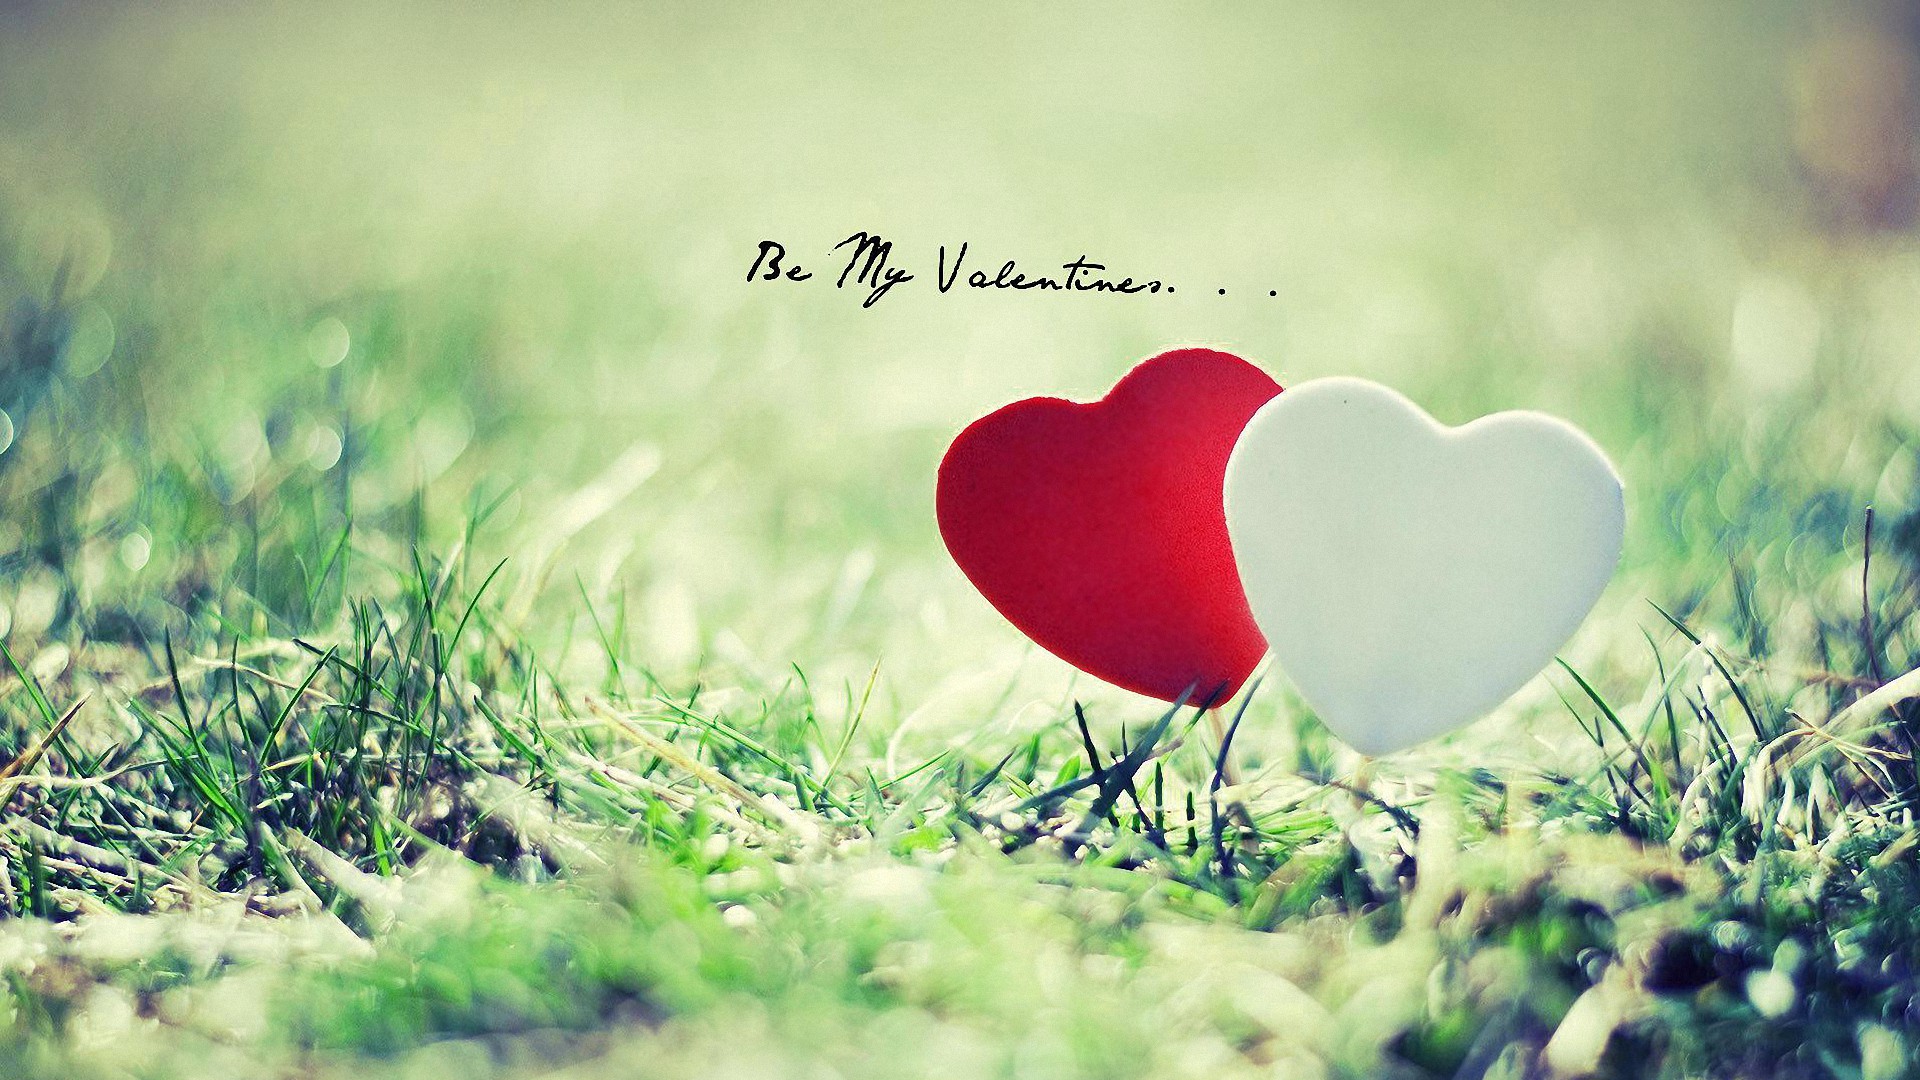 Heart-hd Wallpapers Free Download - Couple Background Images Hd - HD Wallpaper 